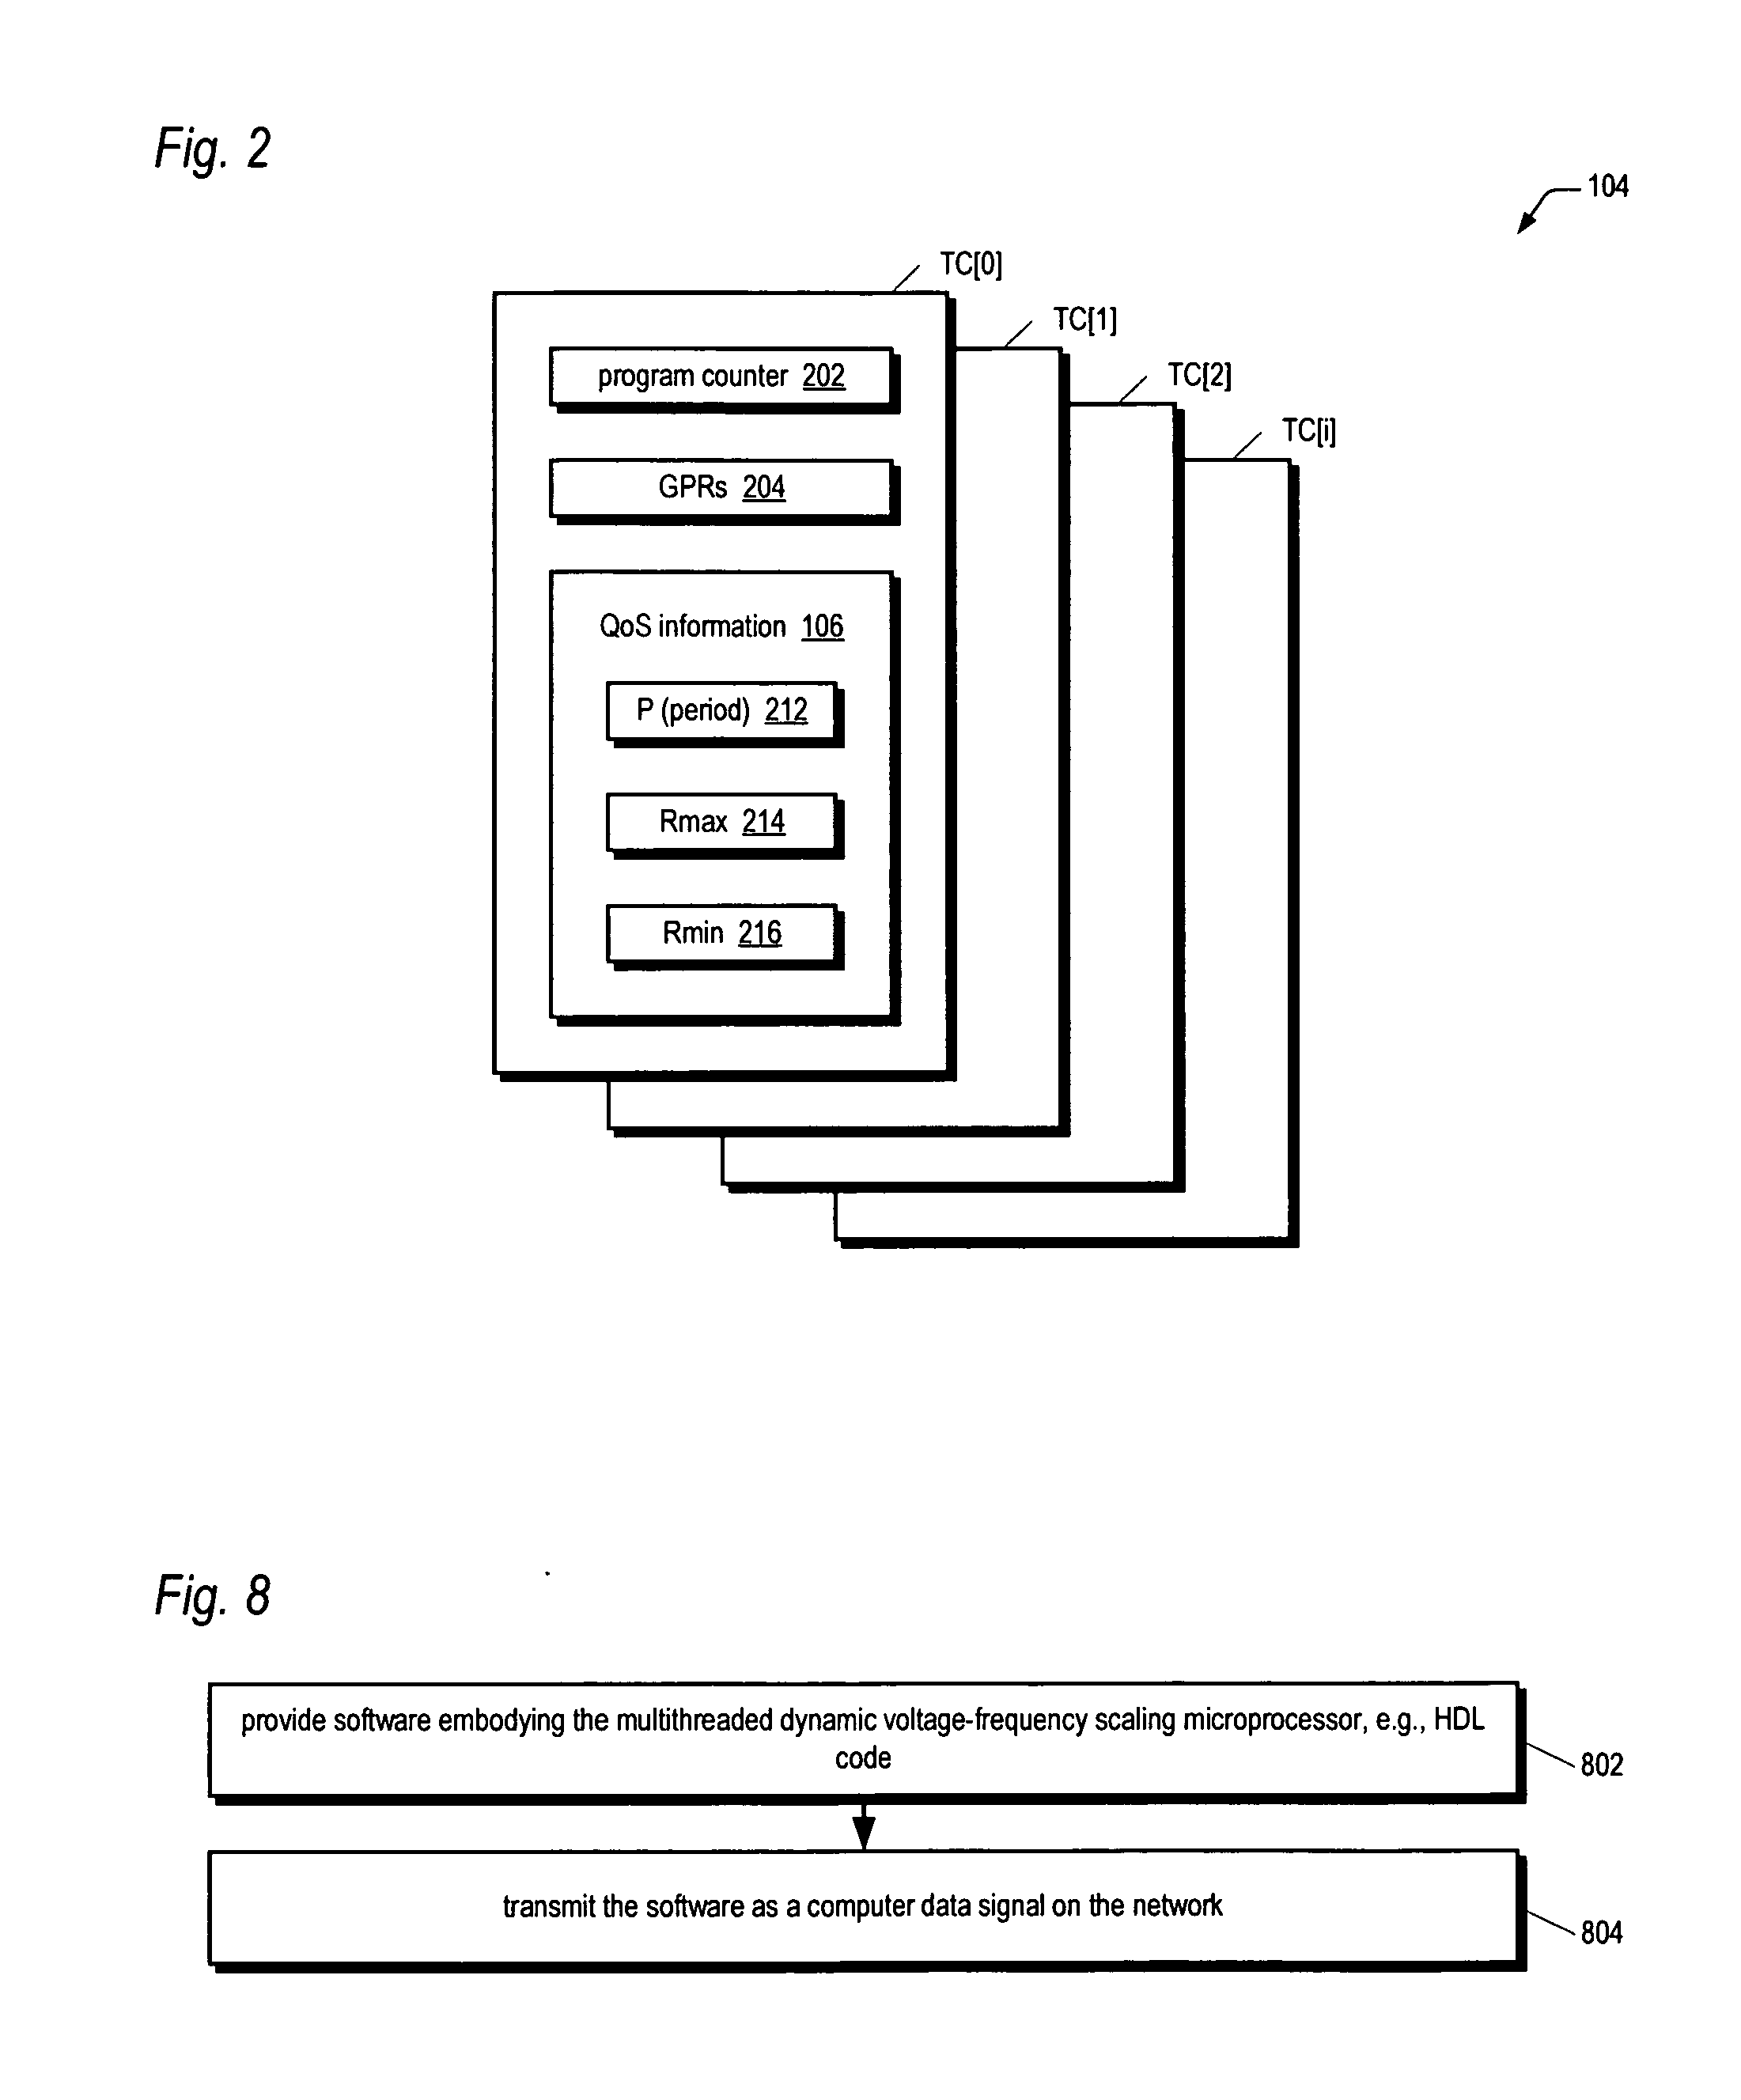 Multithreaded dynamic voltage-frequency scaling microprocessor